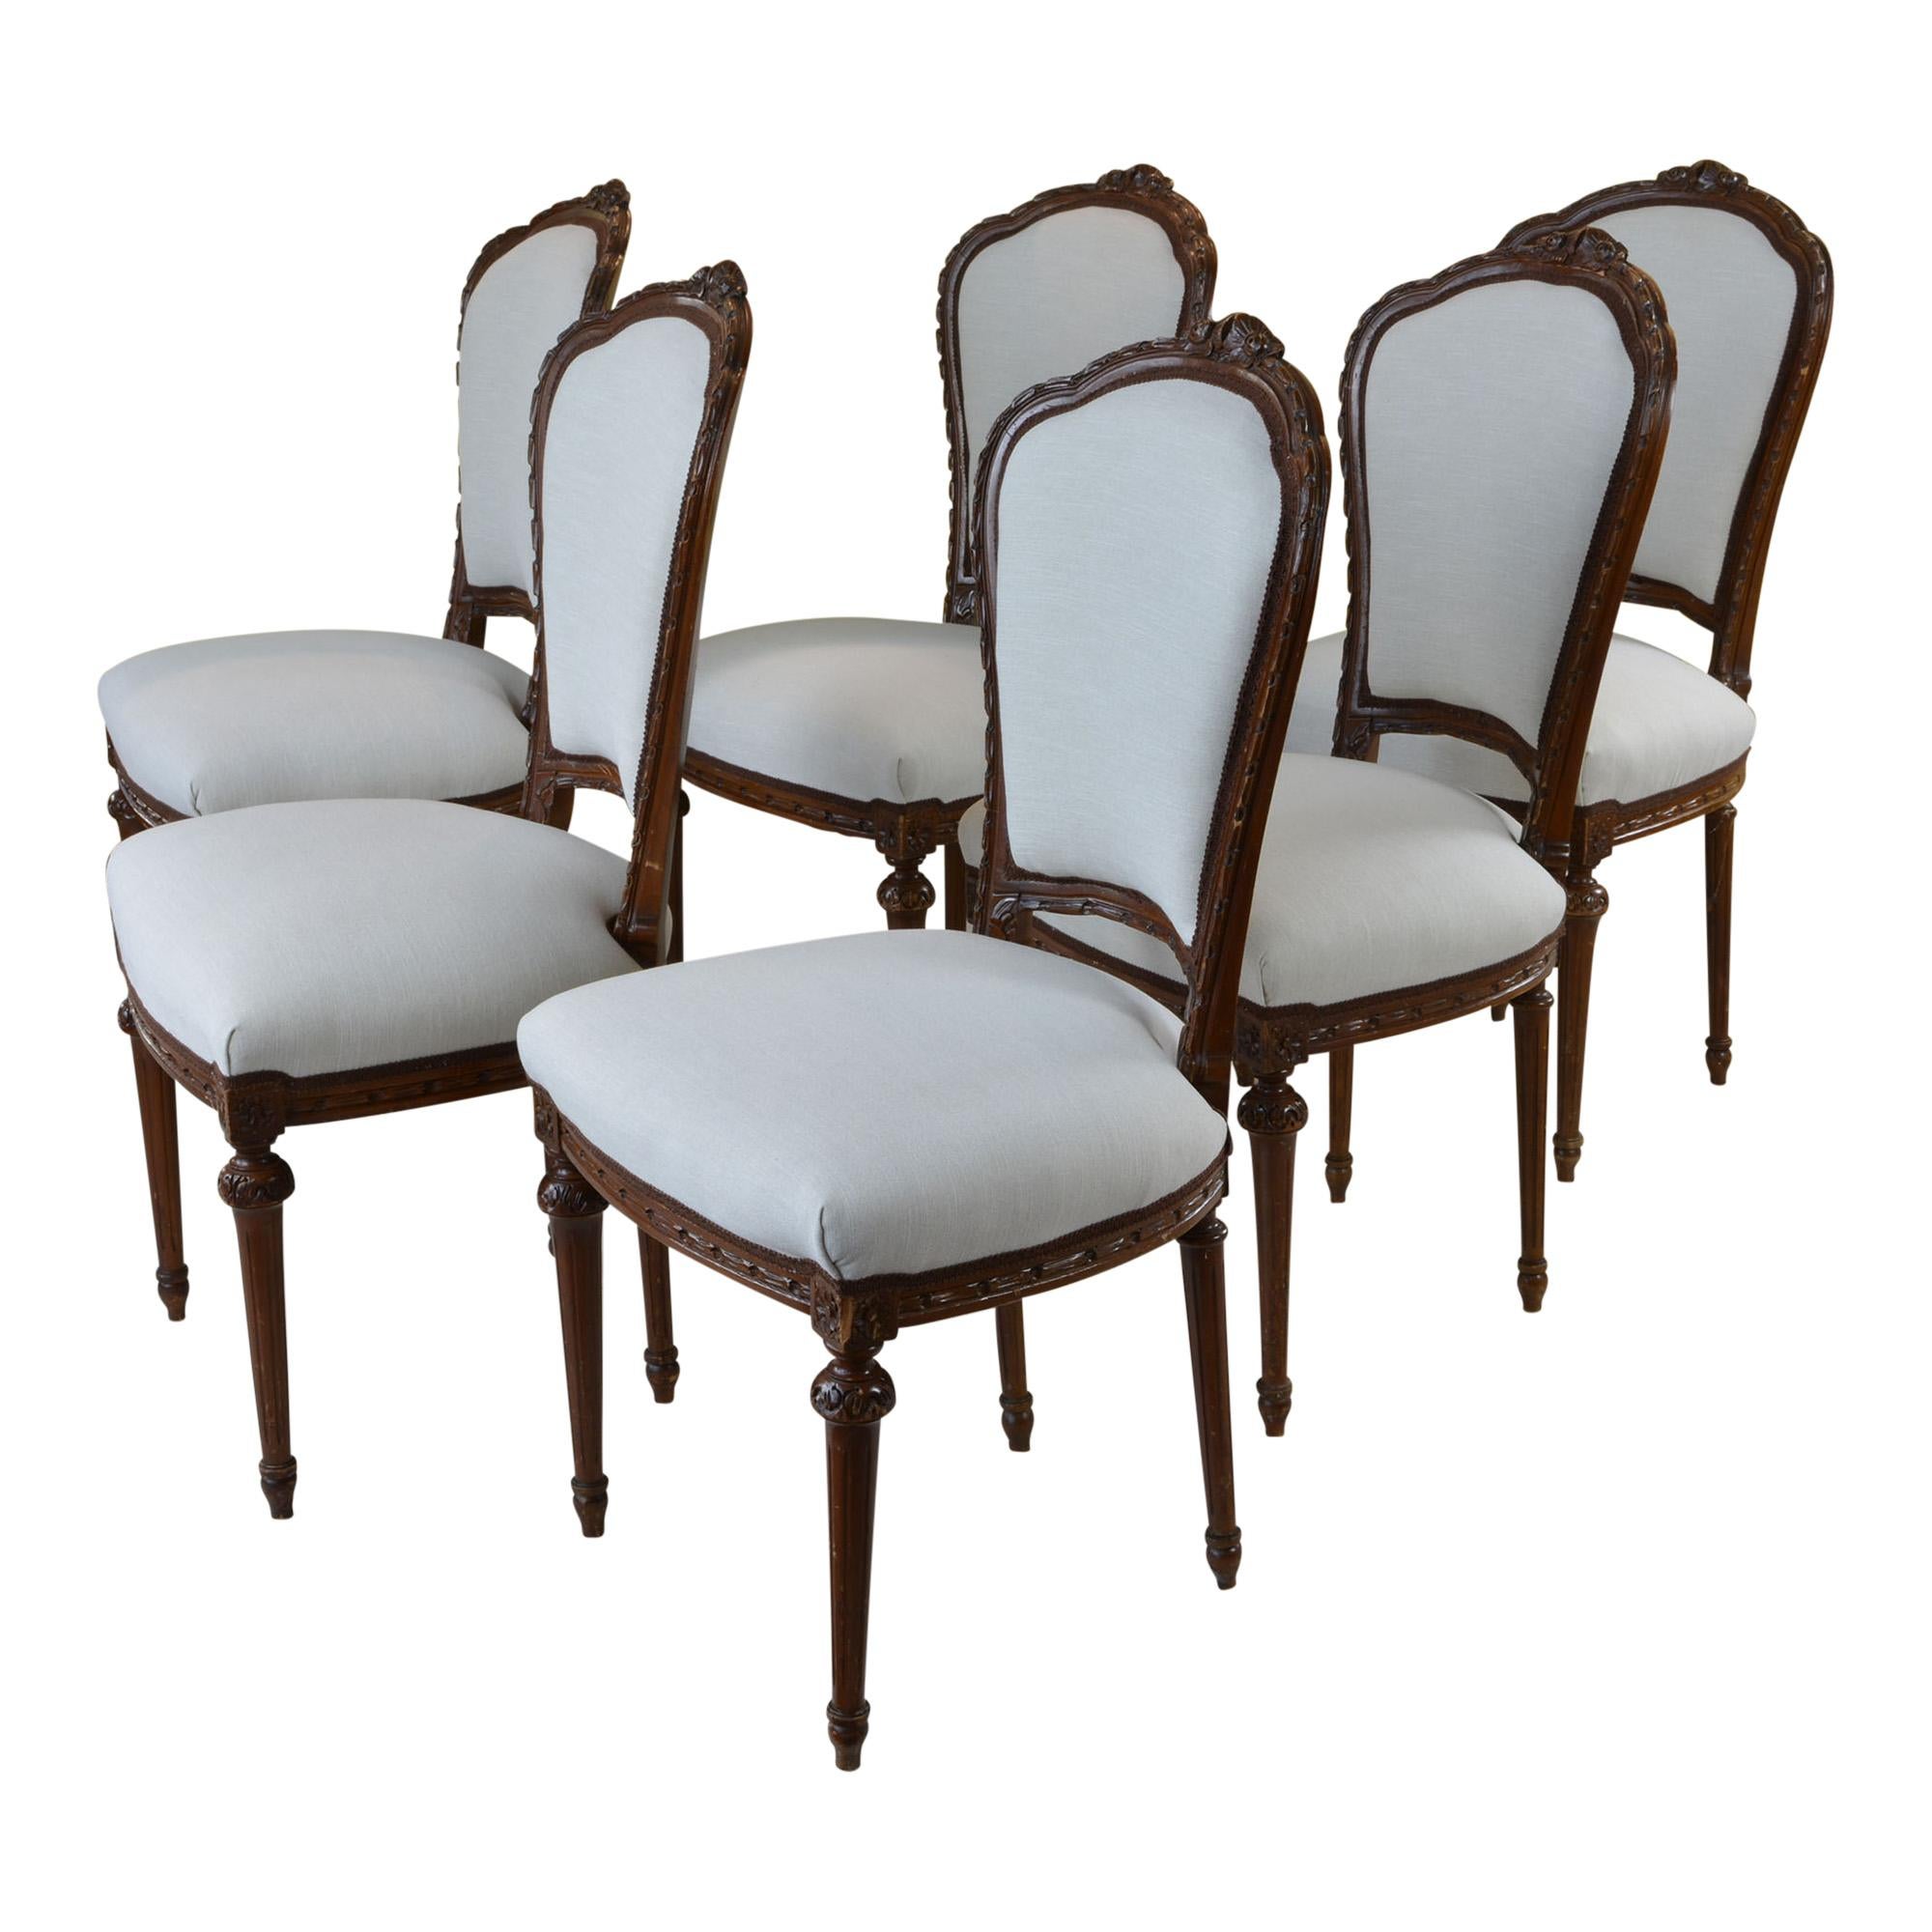 Nice set of 6 antique dining chairs were found at a fabulous New England estate sale. The home was full of beautiful European antiques. The chairs were right at home amongst the elegant decor. The dining chairs feature a lovely carved flower detail